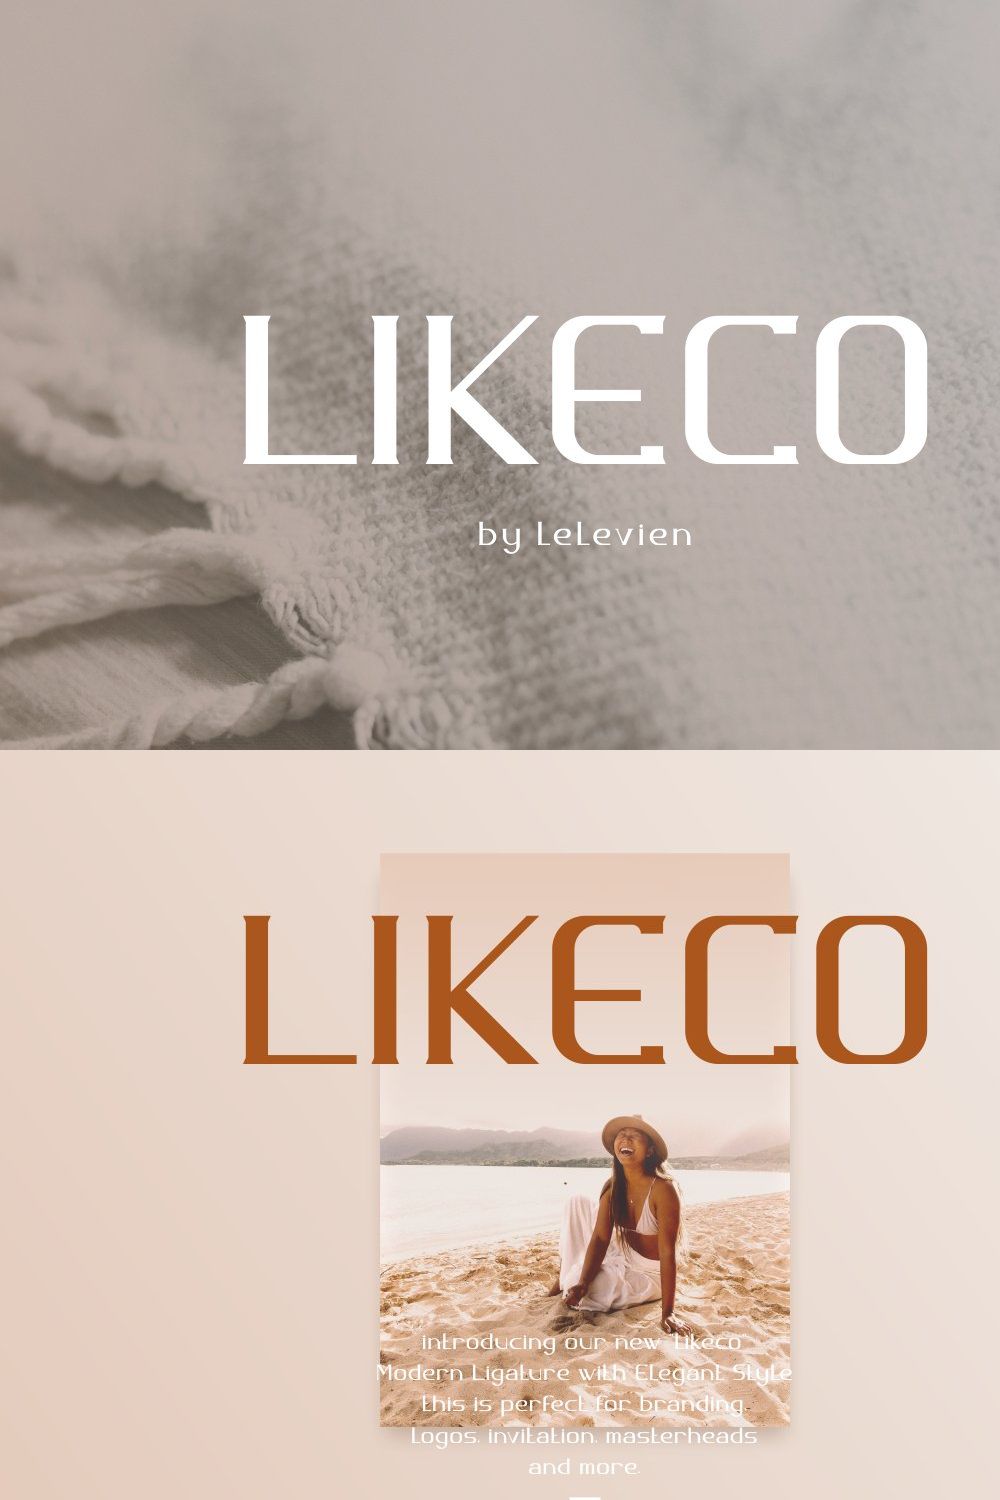 Likeco pinterest preview image.